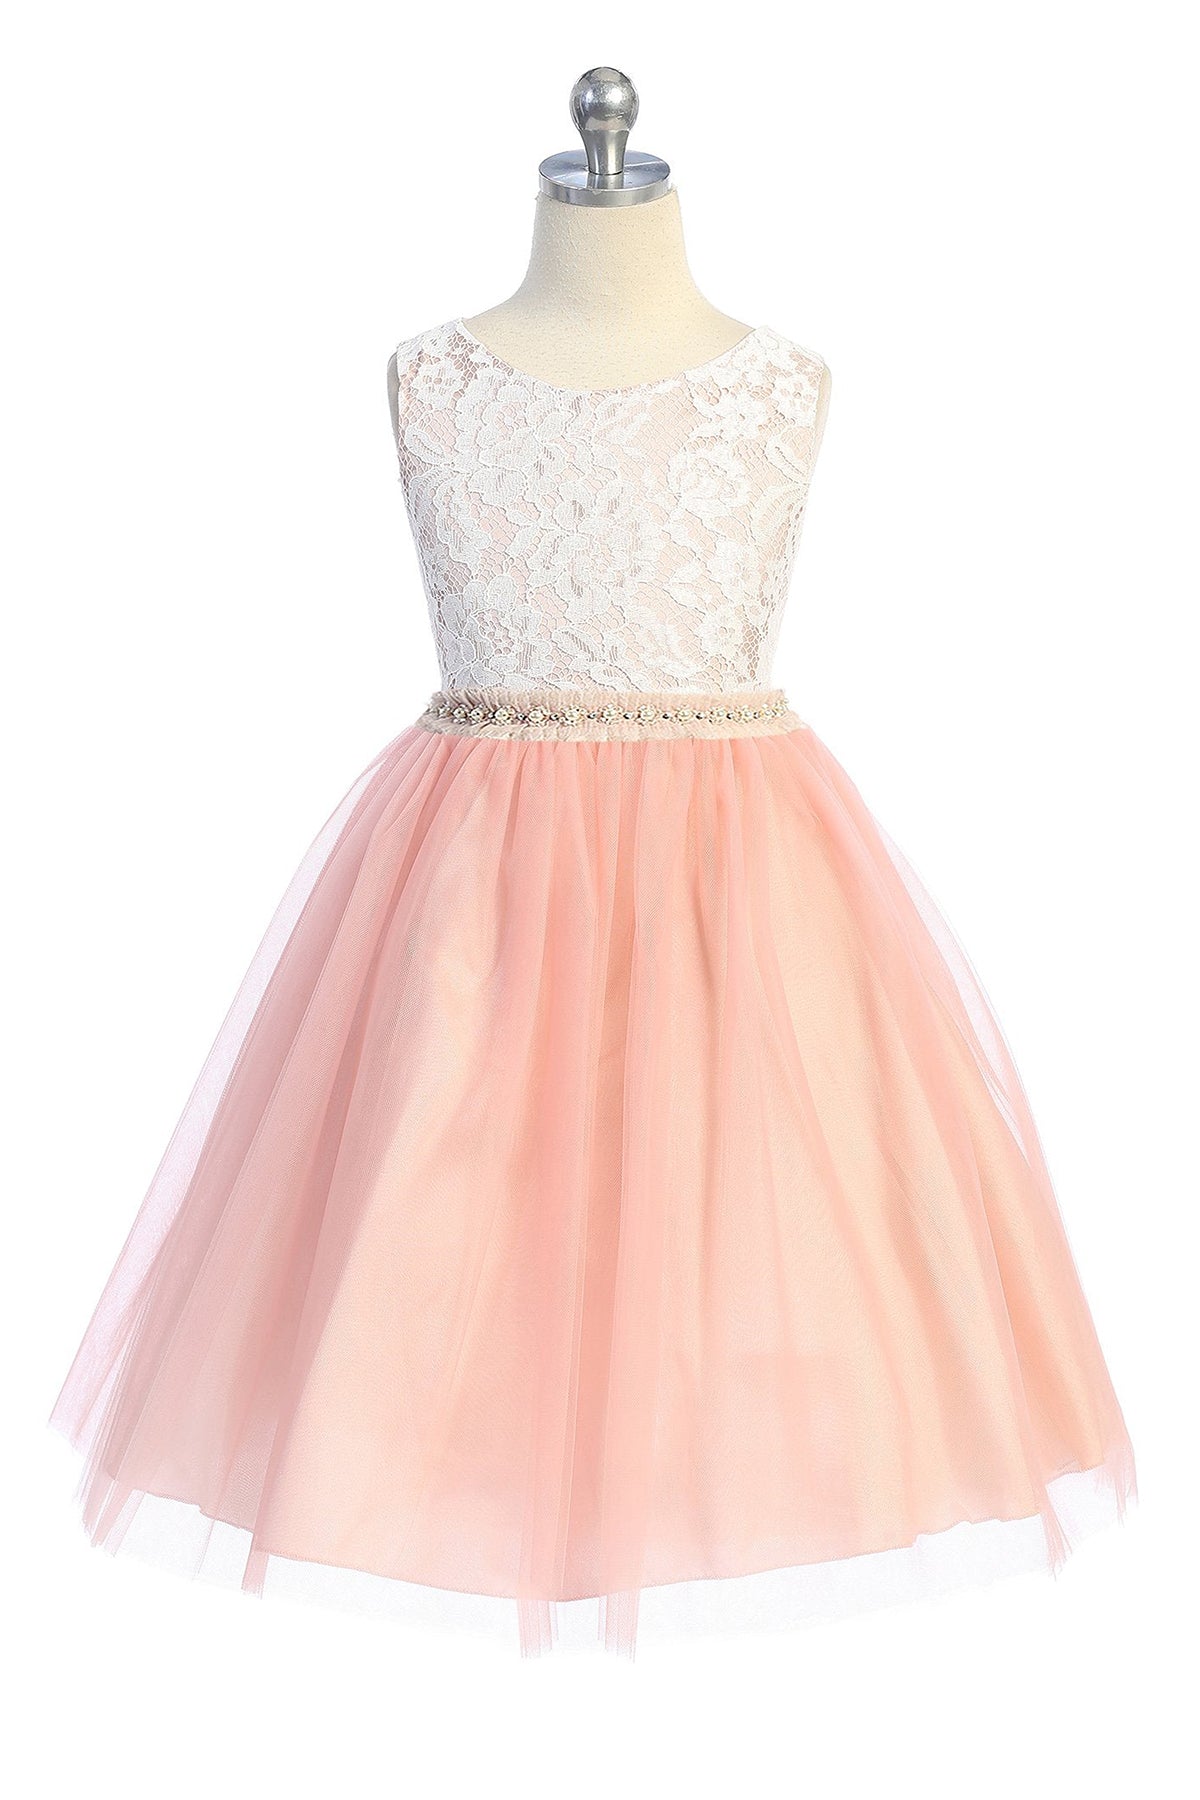 456-B Lace Illusion Girls Dress with Mesh Pearl Trim